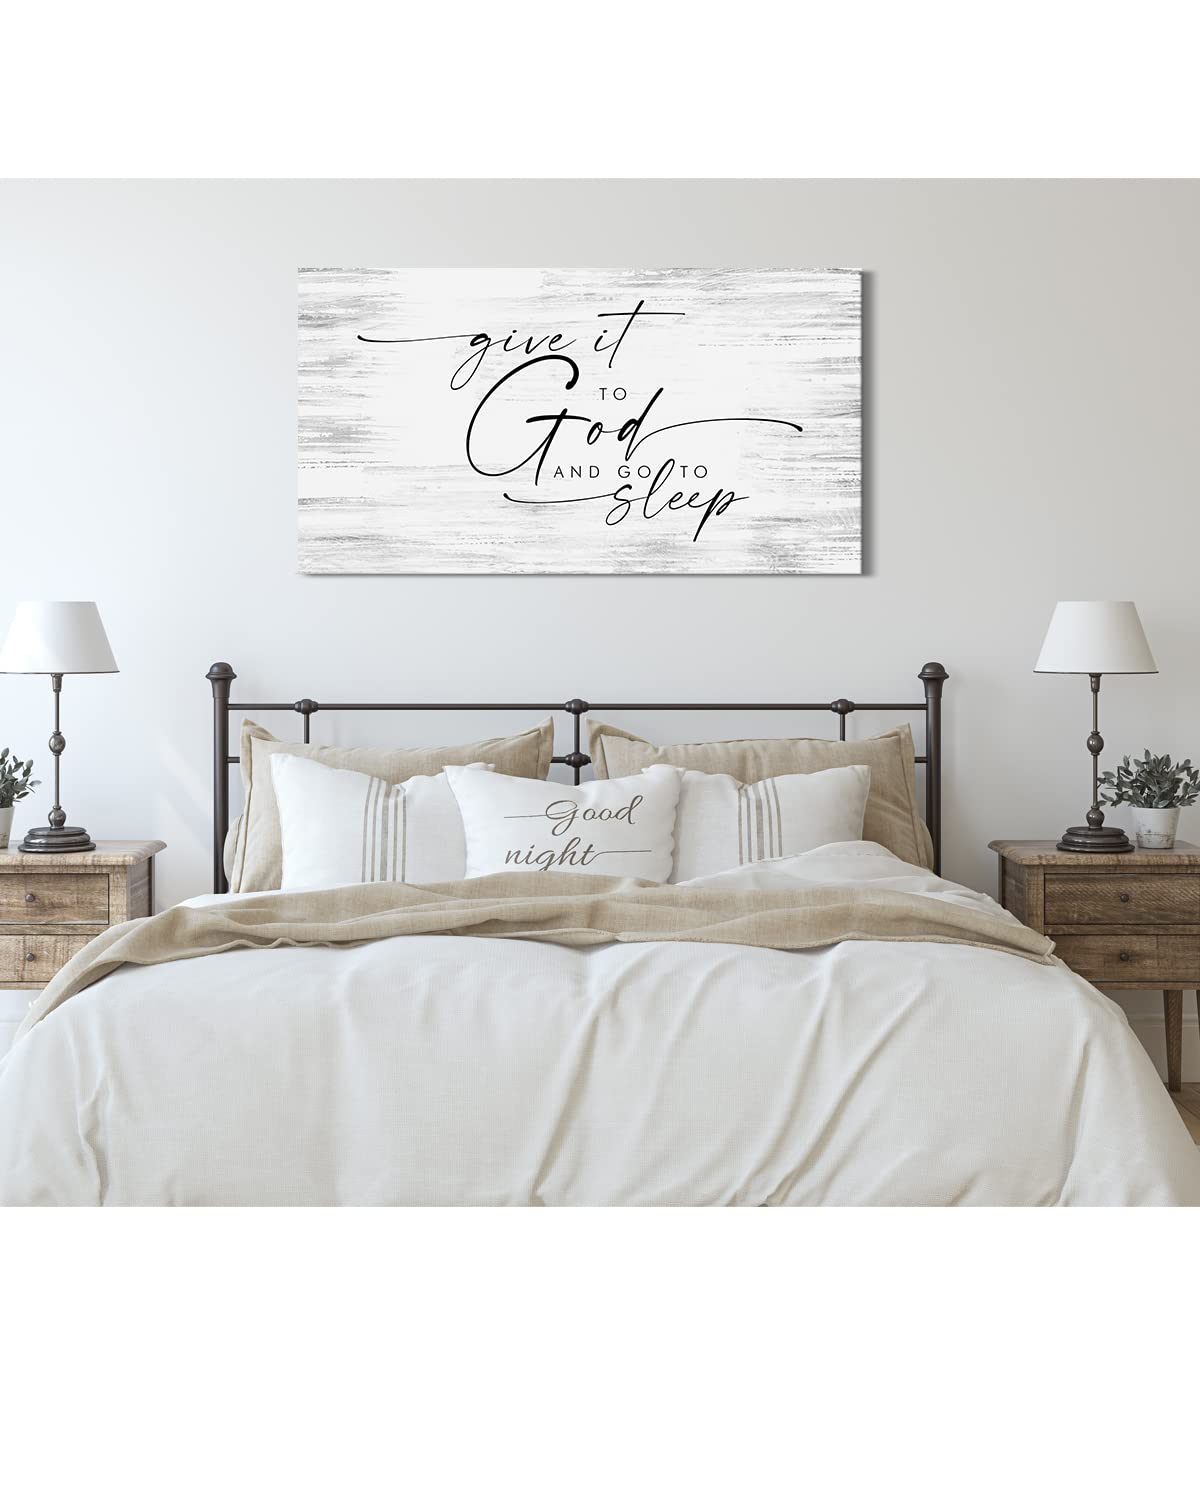 Above Bed Wall Decor for Bedroom - Give It To God and Go To Sleep Master Bedroom Wall Art - Minimalist Farmhouse Decor - Wedding Gift for Couple - Bridal Shower Gift